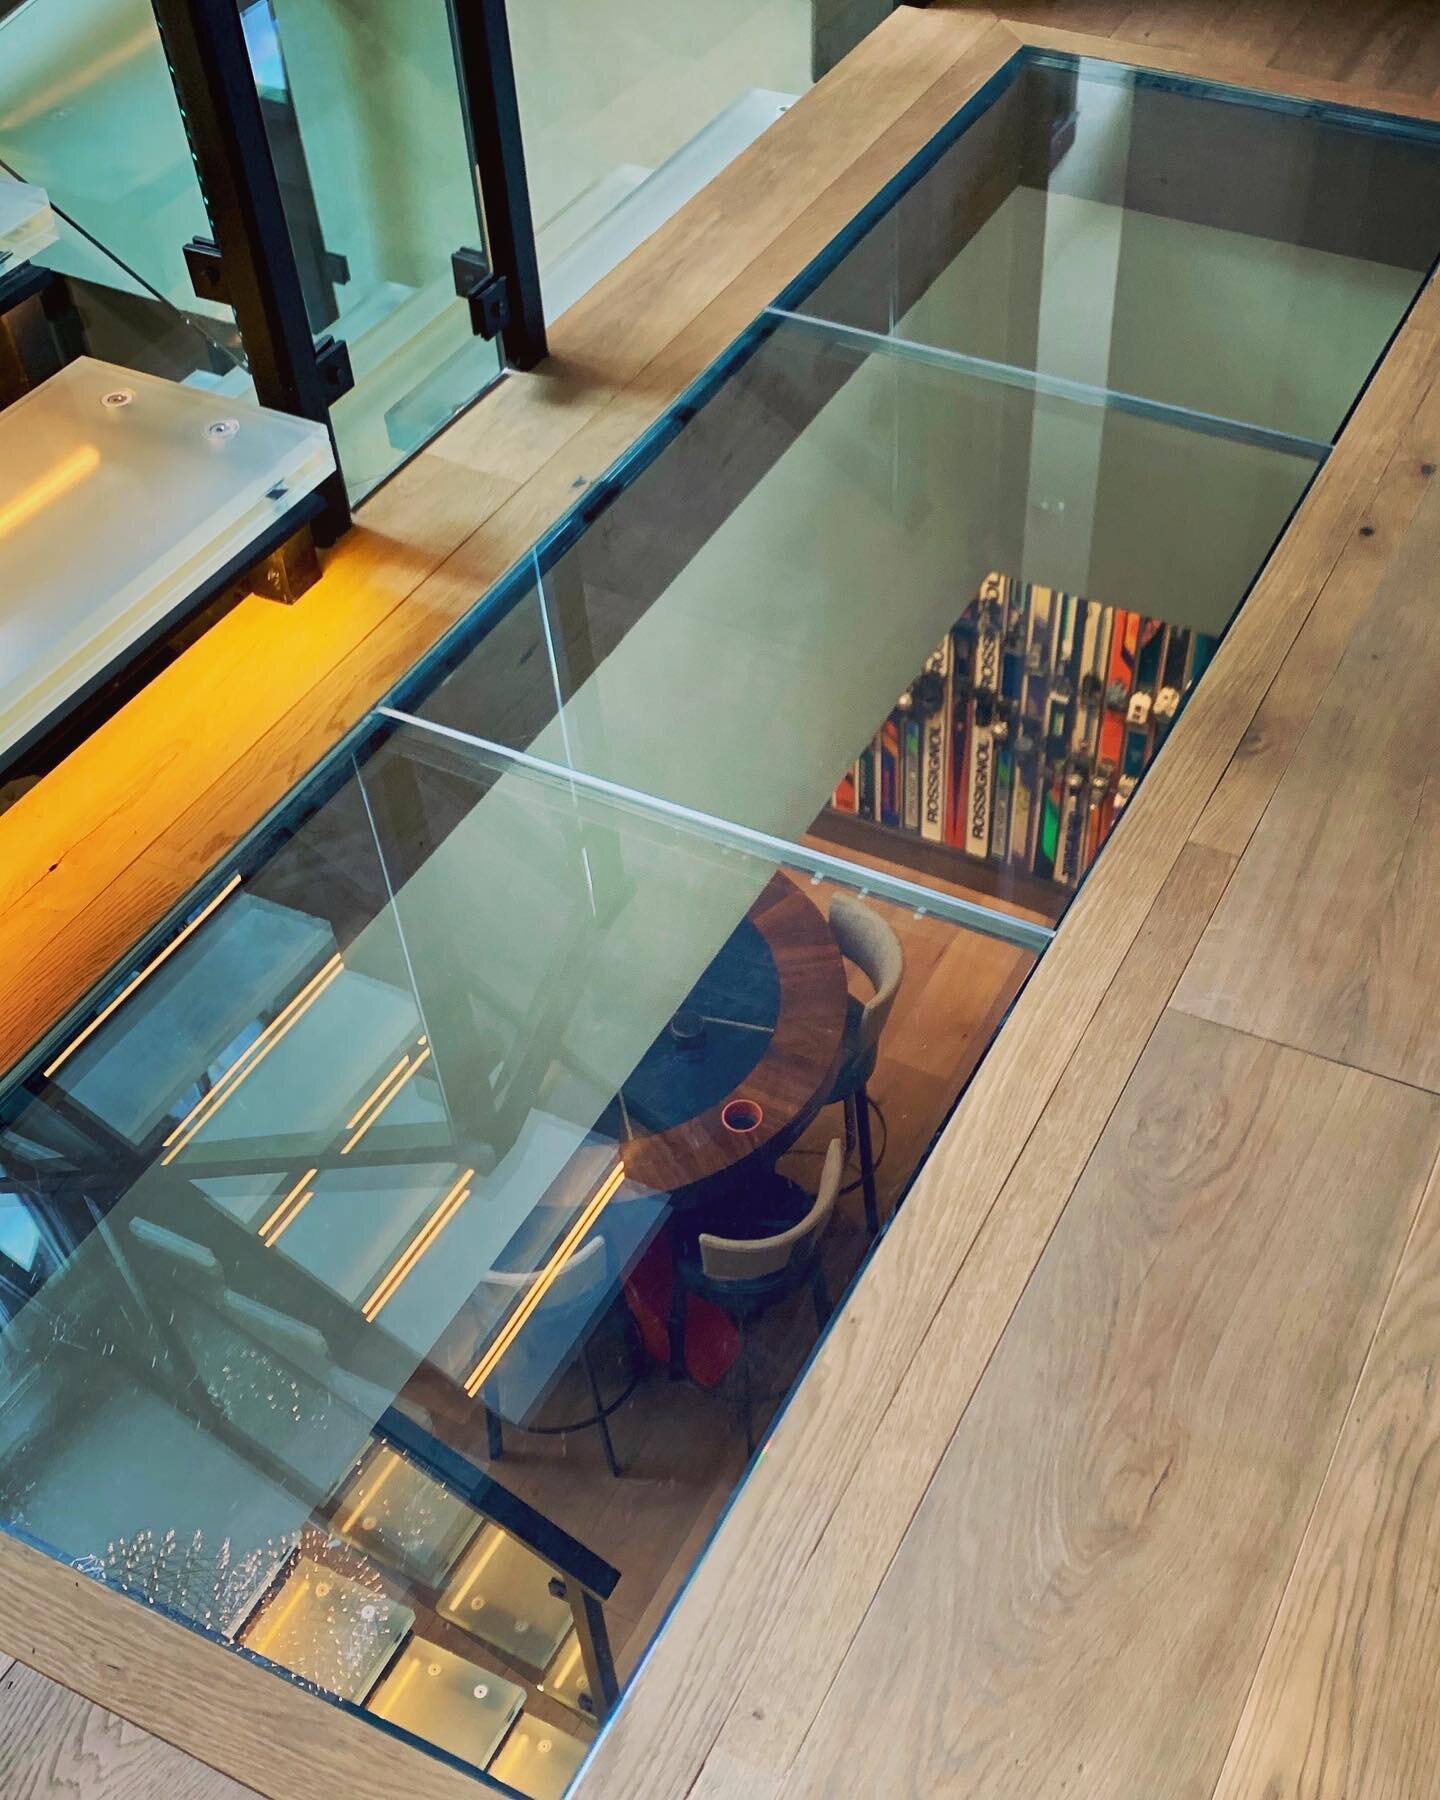 The details in these homes are pretty cool sometimes. 
#devilsinthedetails #viewfromabove #luxuryhomes #custom #pokertable #gamingtable #bespokefurniture #glassceiling #glassfloor #interiordesign #uniqueinteriors  #workwithyourhands #metalwork #woodw